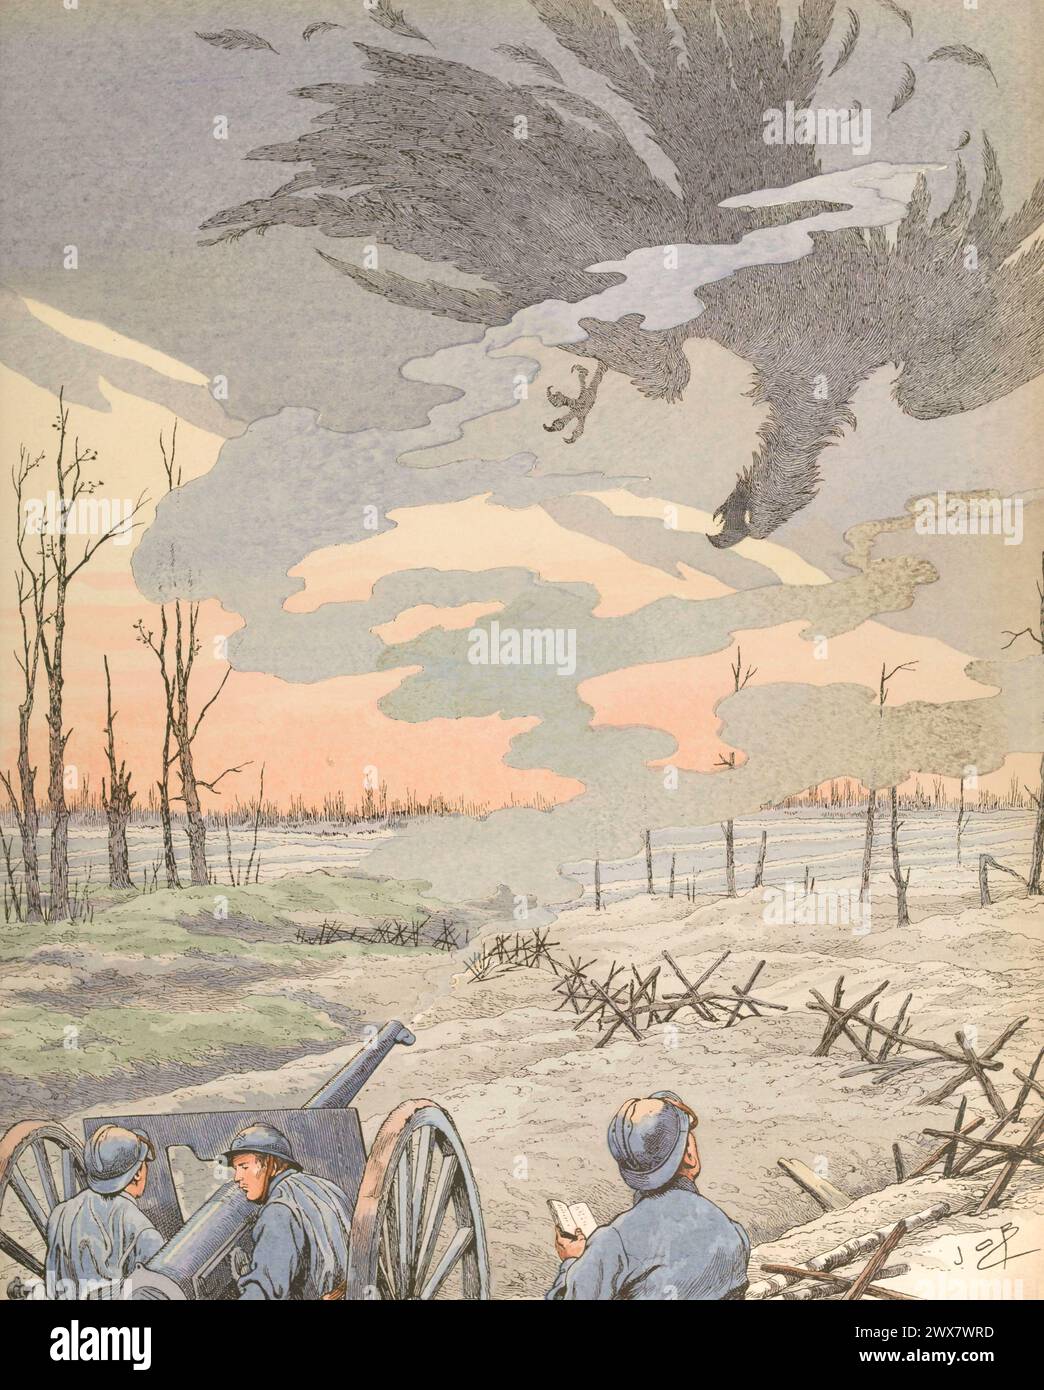 French artillery soldiers firing a shell at the German enemy (symbolised by an eagle silhouette) using a 75 mm field gun.  Illustration by Job published in the book 'Allons, Enfants de la Patrie !...' by Jean Richepin. Published by A. Mame et fils in 1920. Stock Photo